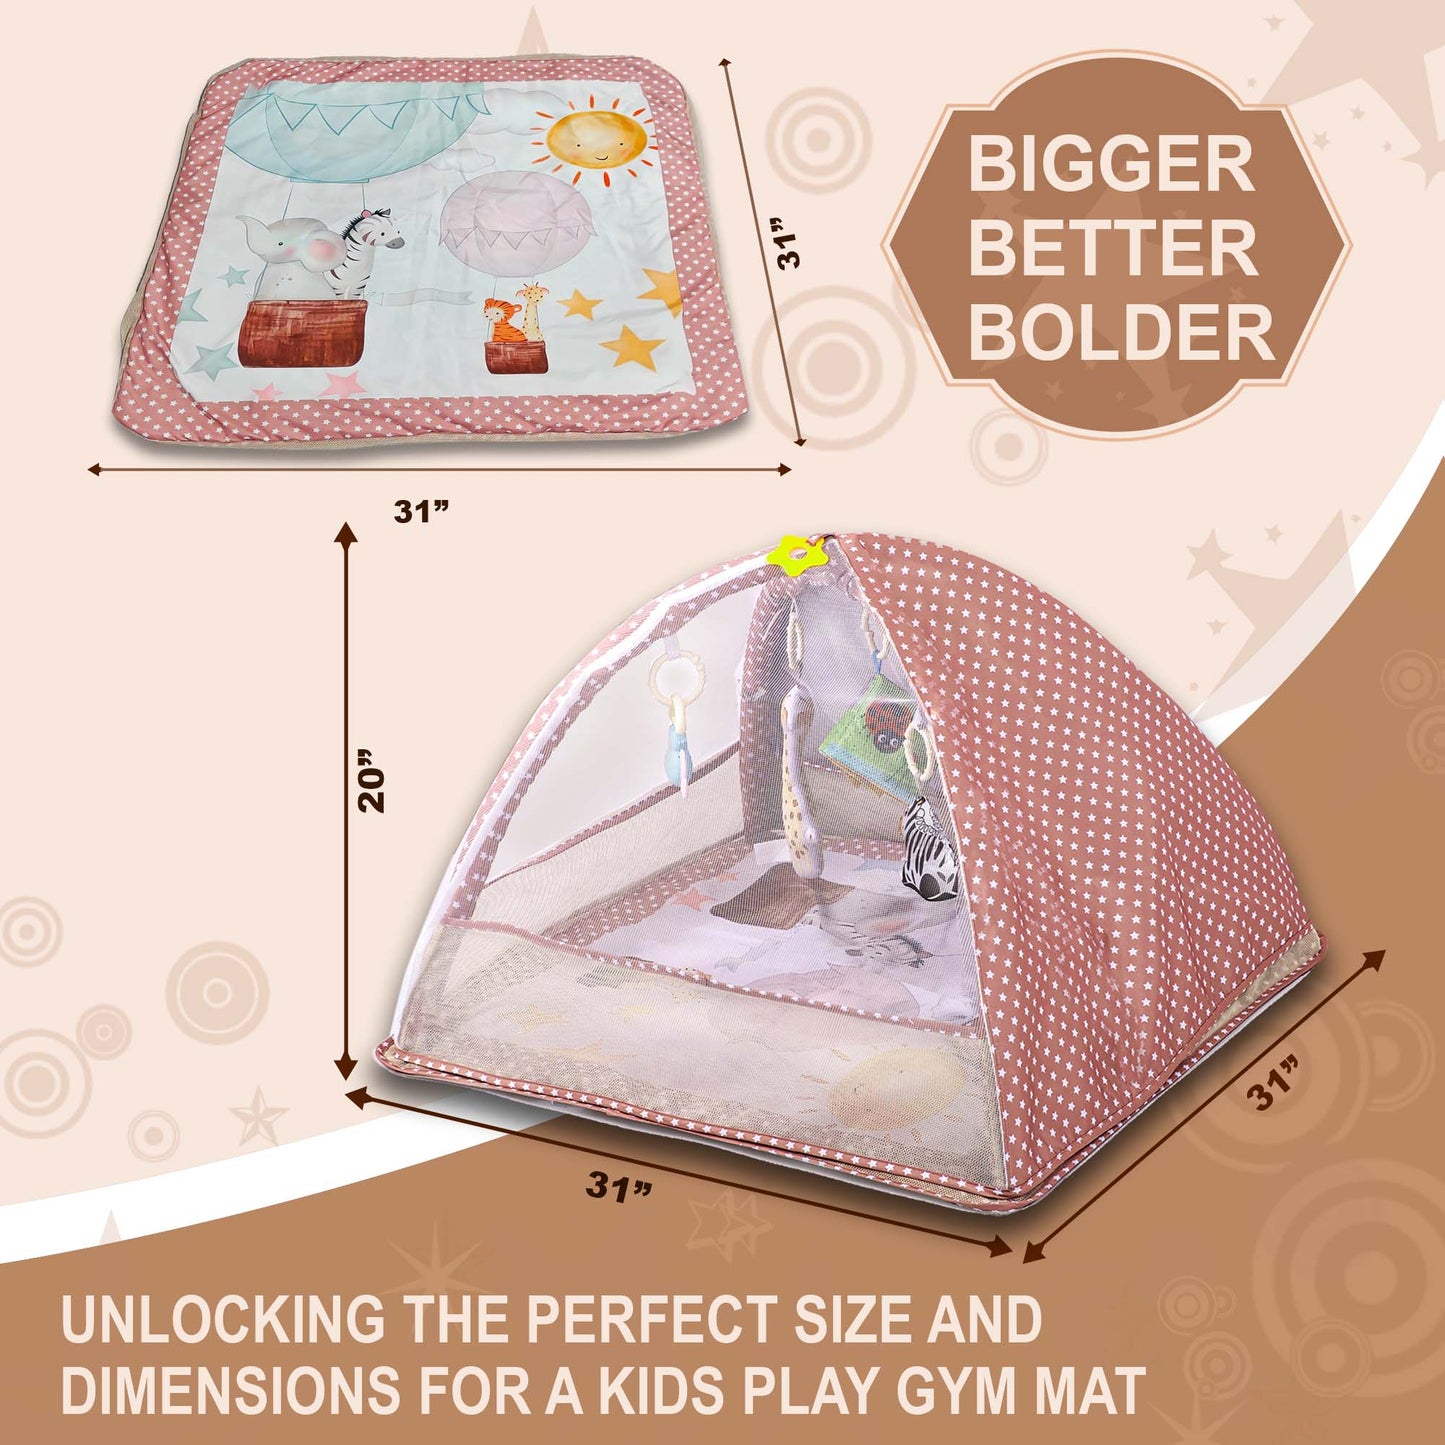 Kidikools 6-in-1 Baby Play Gym Activity Center with Mosquito Net & Sun Canopy  for Babies 0-12 Months